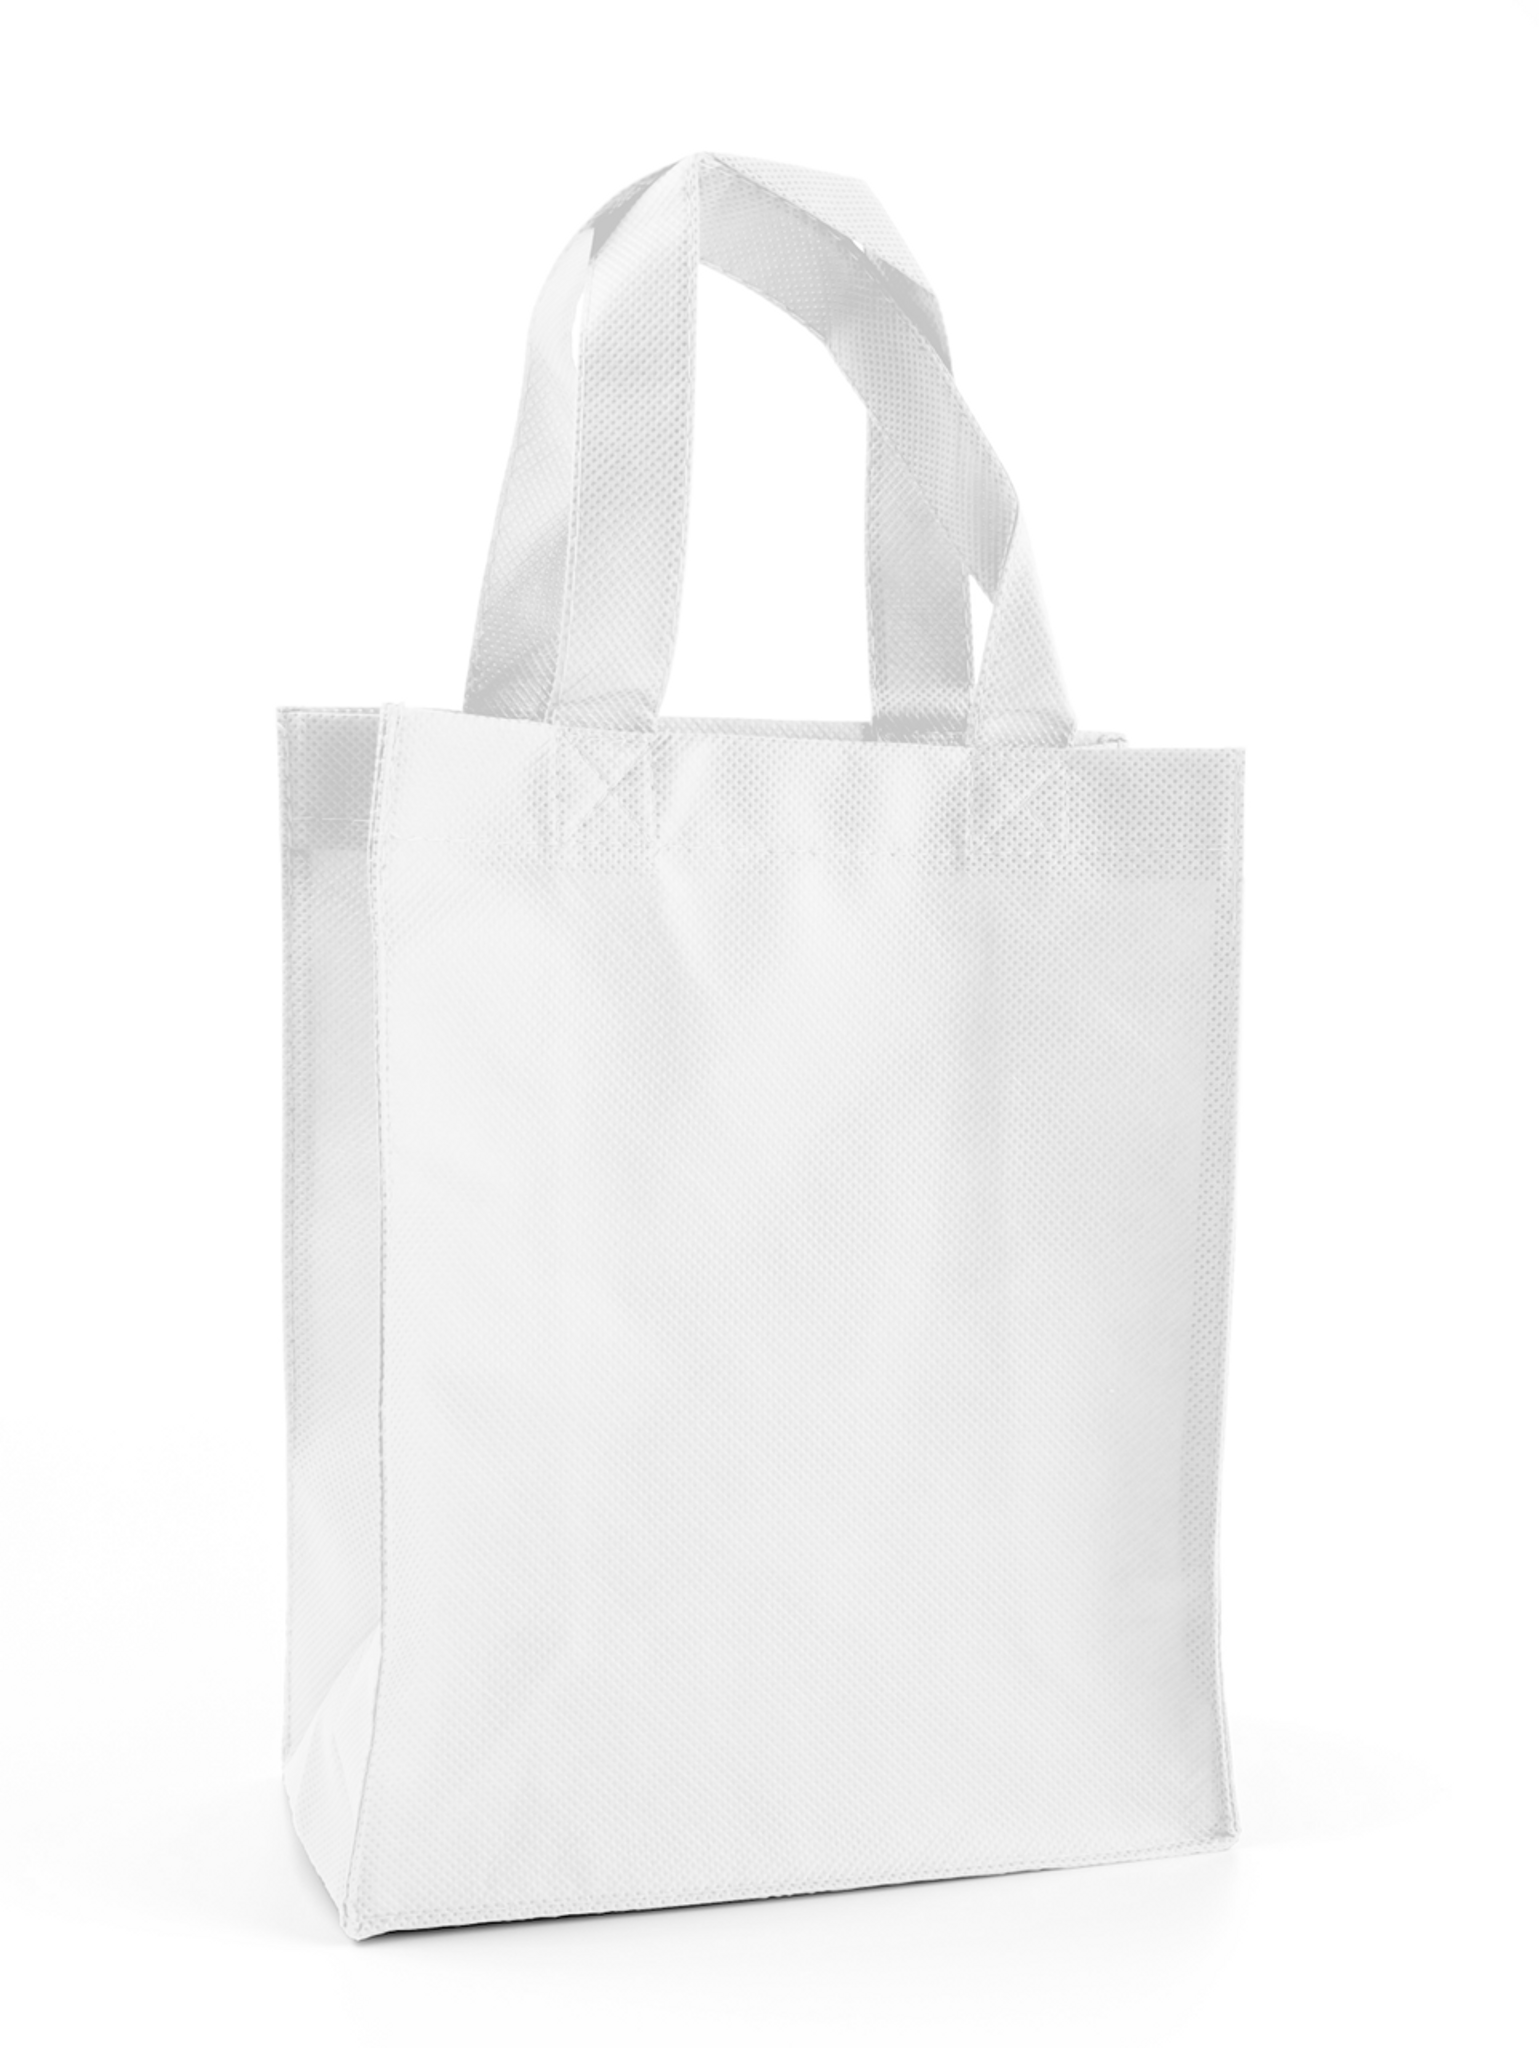 Chloé Small East West Tote w/ Tags - White Totes, Handbags